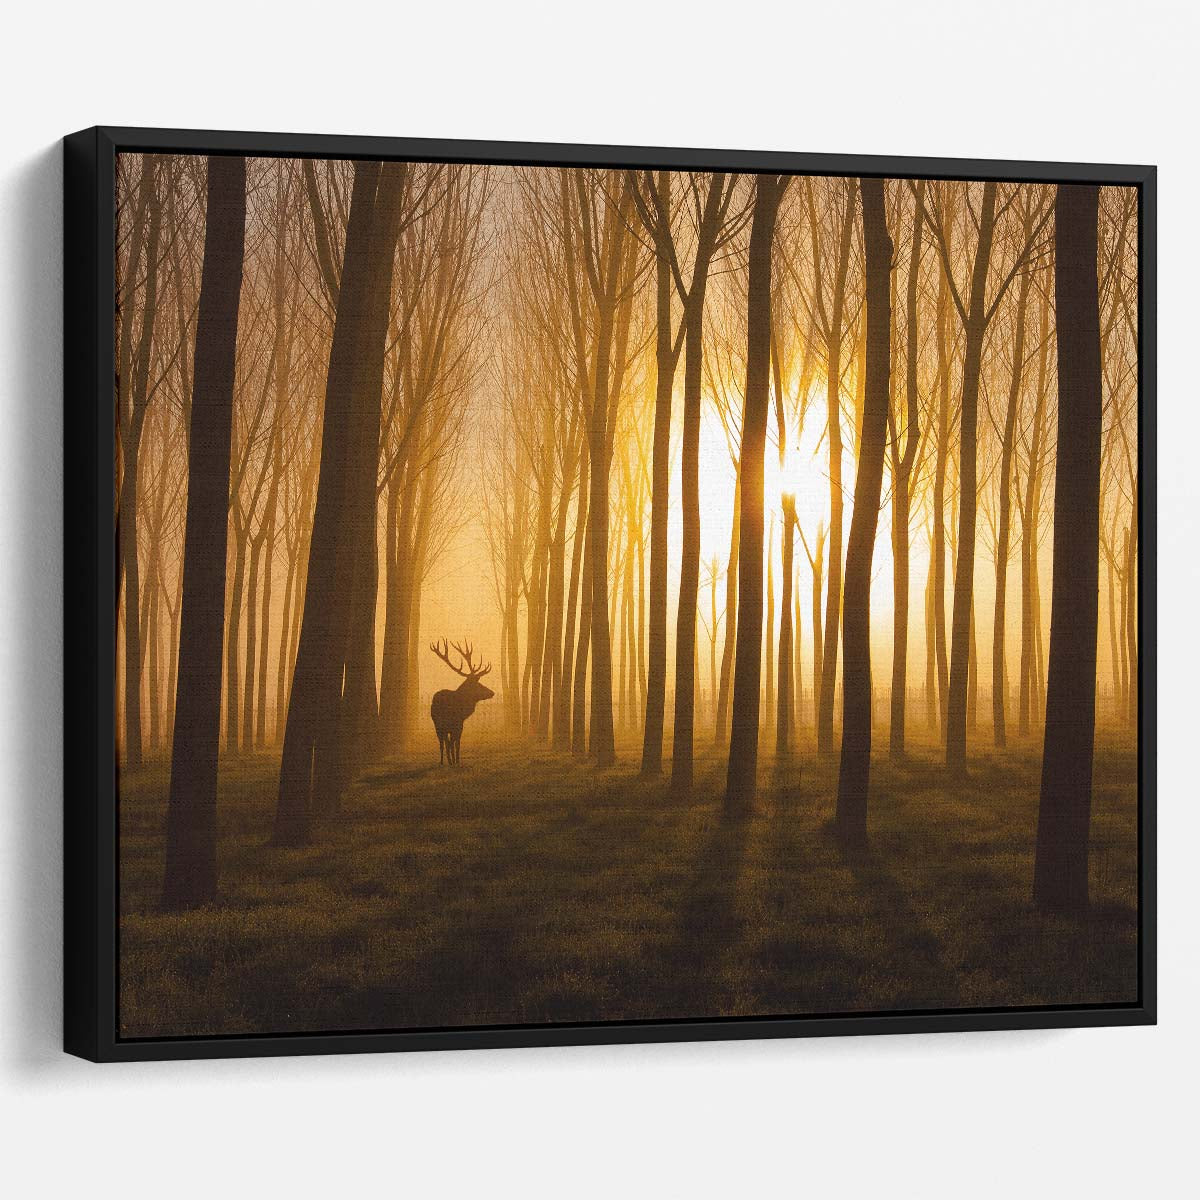 Majestic Deer at Sunrise Foggy Forest Landscape Photography Wall Art